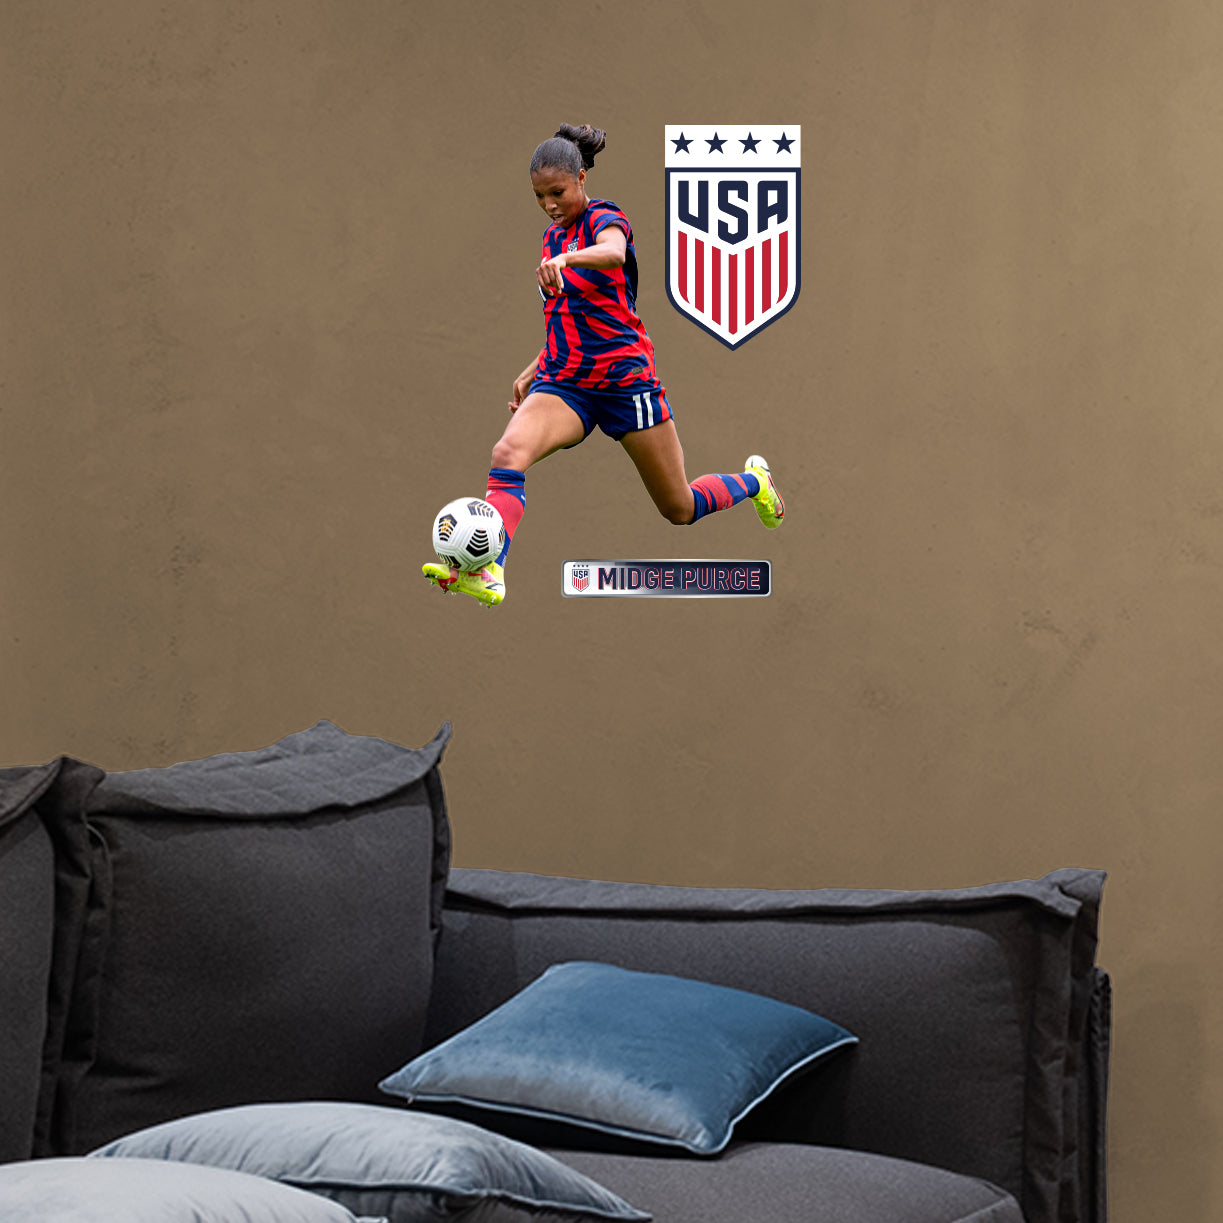 Midge Purce RealBig - Officially Licensed USWNT Removable Adhesive Decal